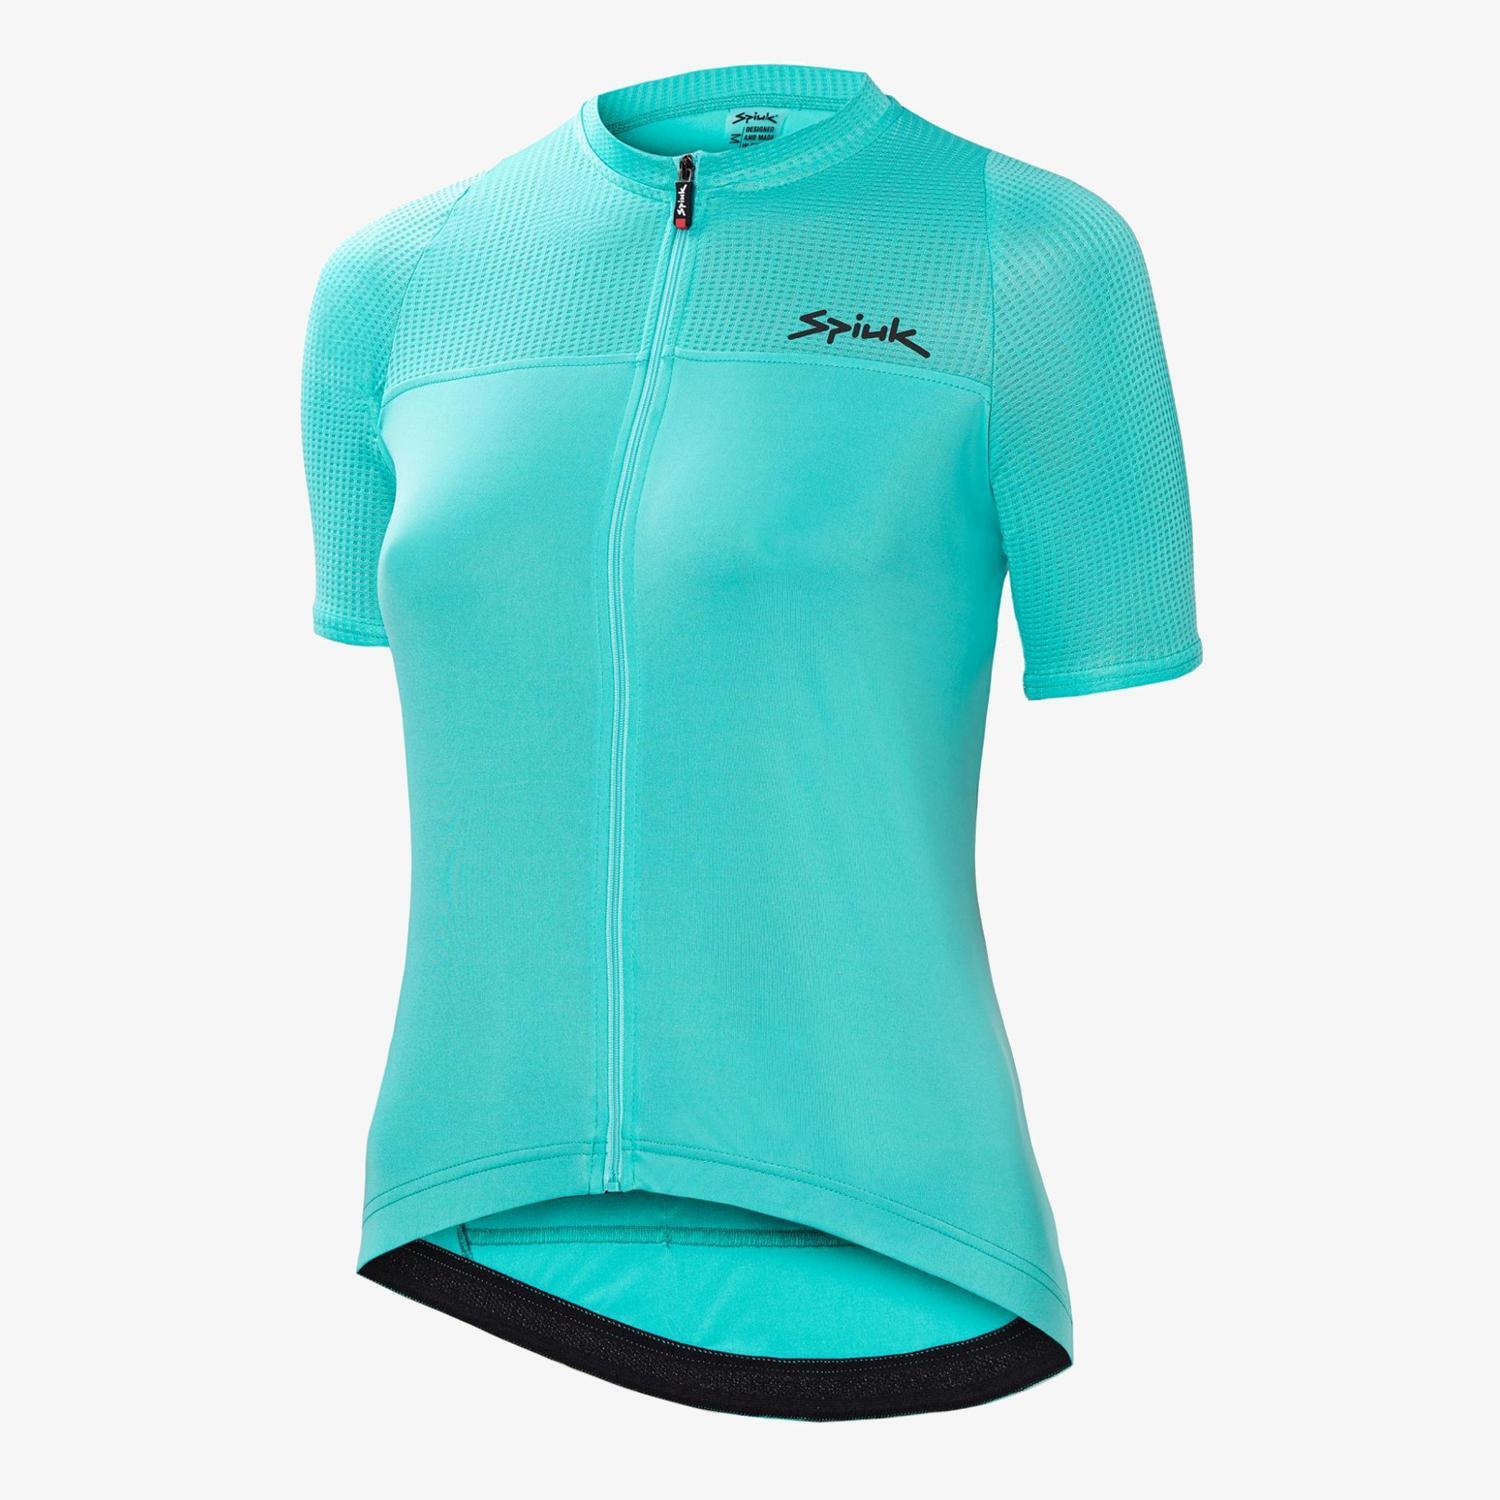 Spiuk Anatomic - Turquoise - Maillot Cyclisme Femme sports taille XL